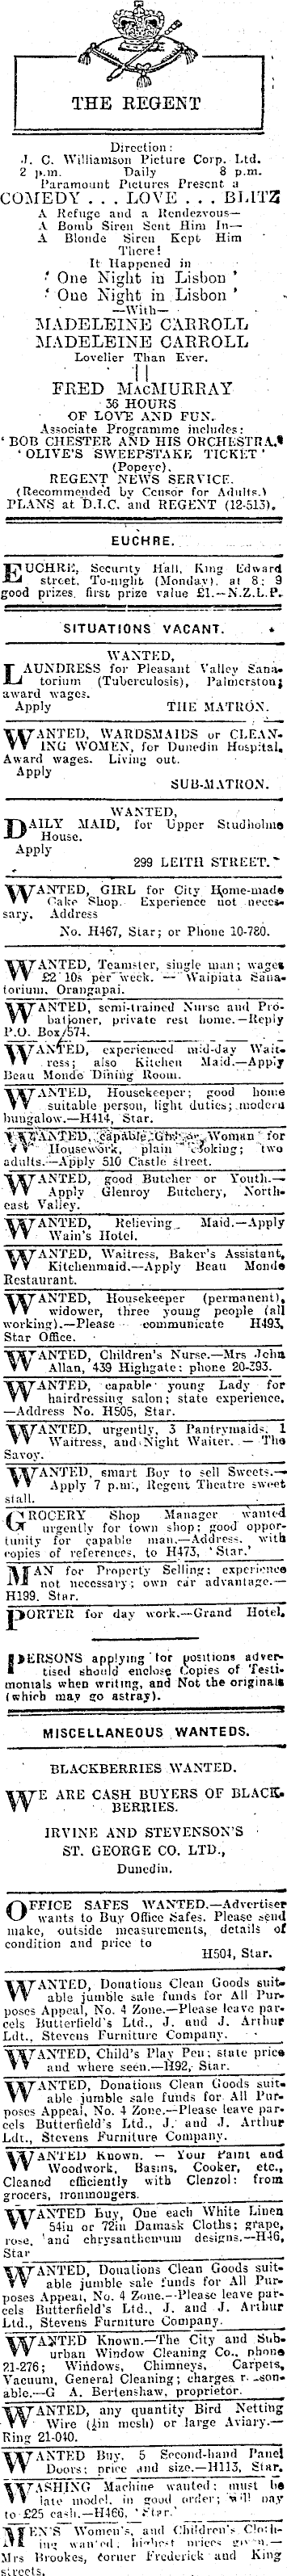 Papers Past Newspapers Evening Star 30 March 1942 Page 1 Advertisements Column 8